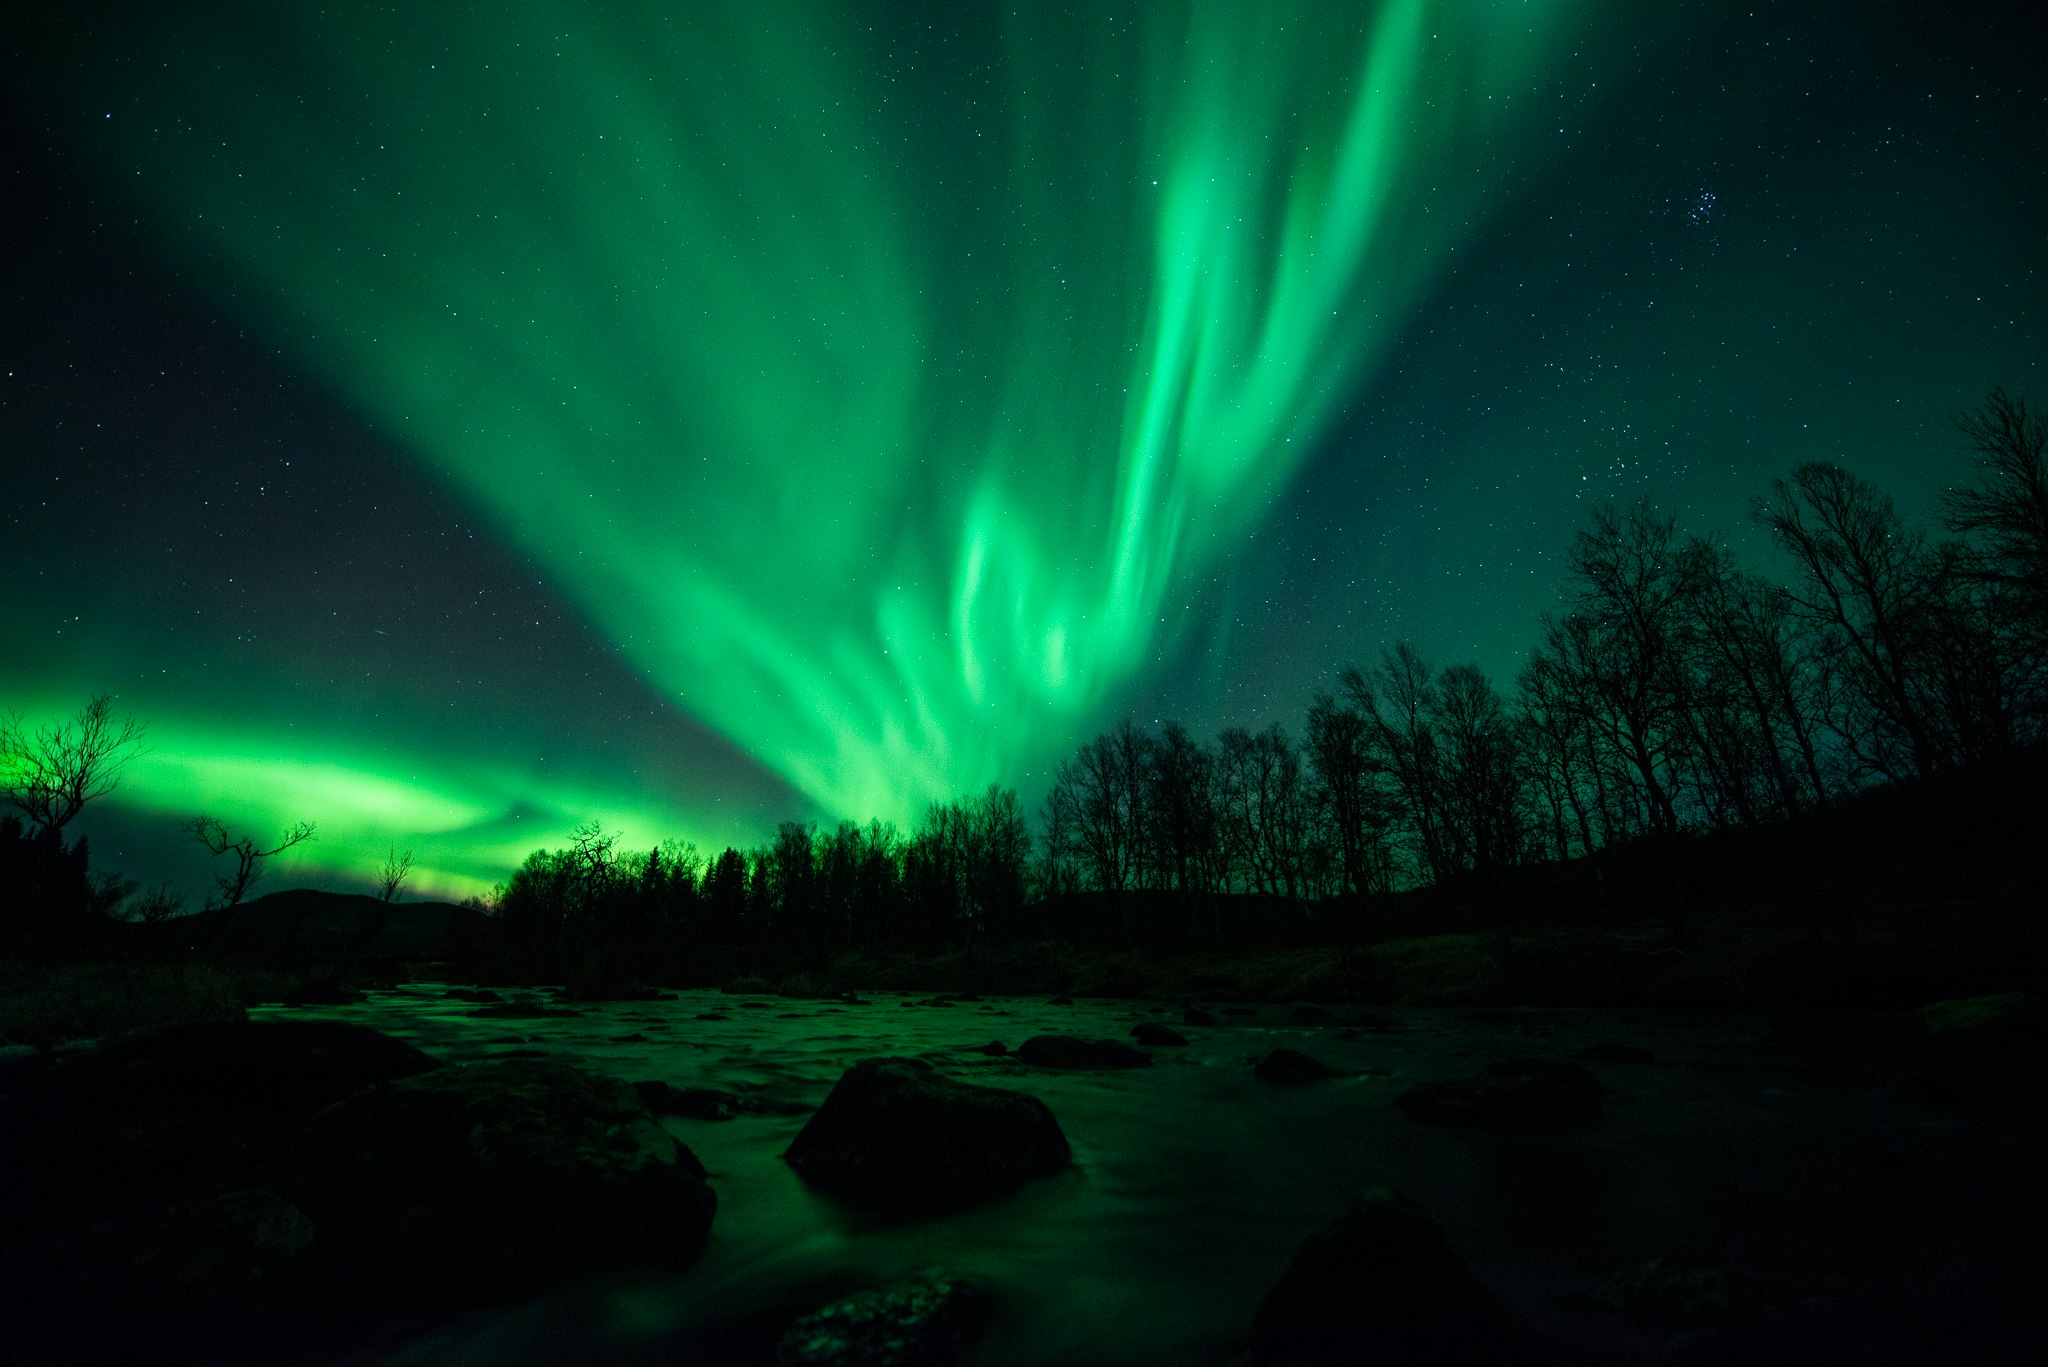 The characteristic green coloured wisps of the aurora borealis flash across the night sky and gently illuminate the forest scene beneath them.